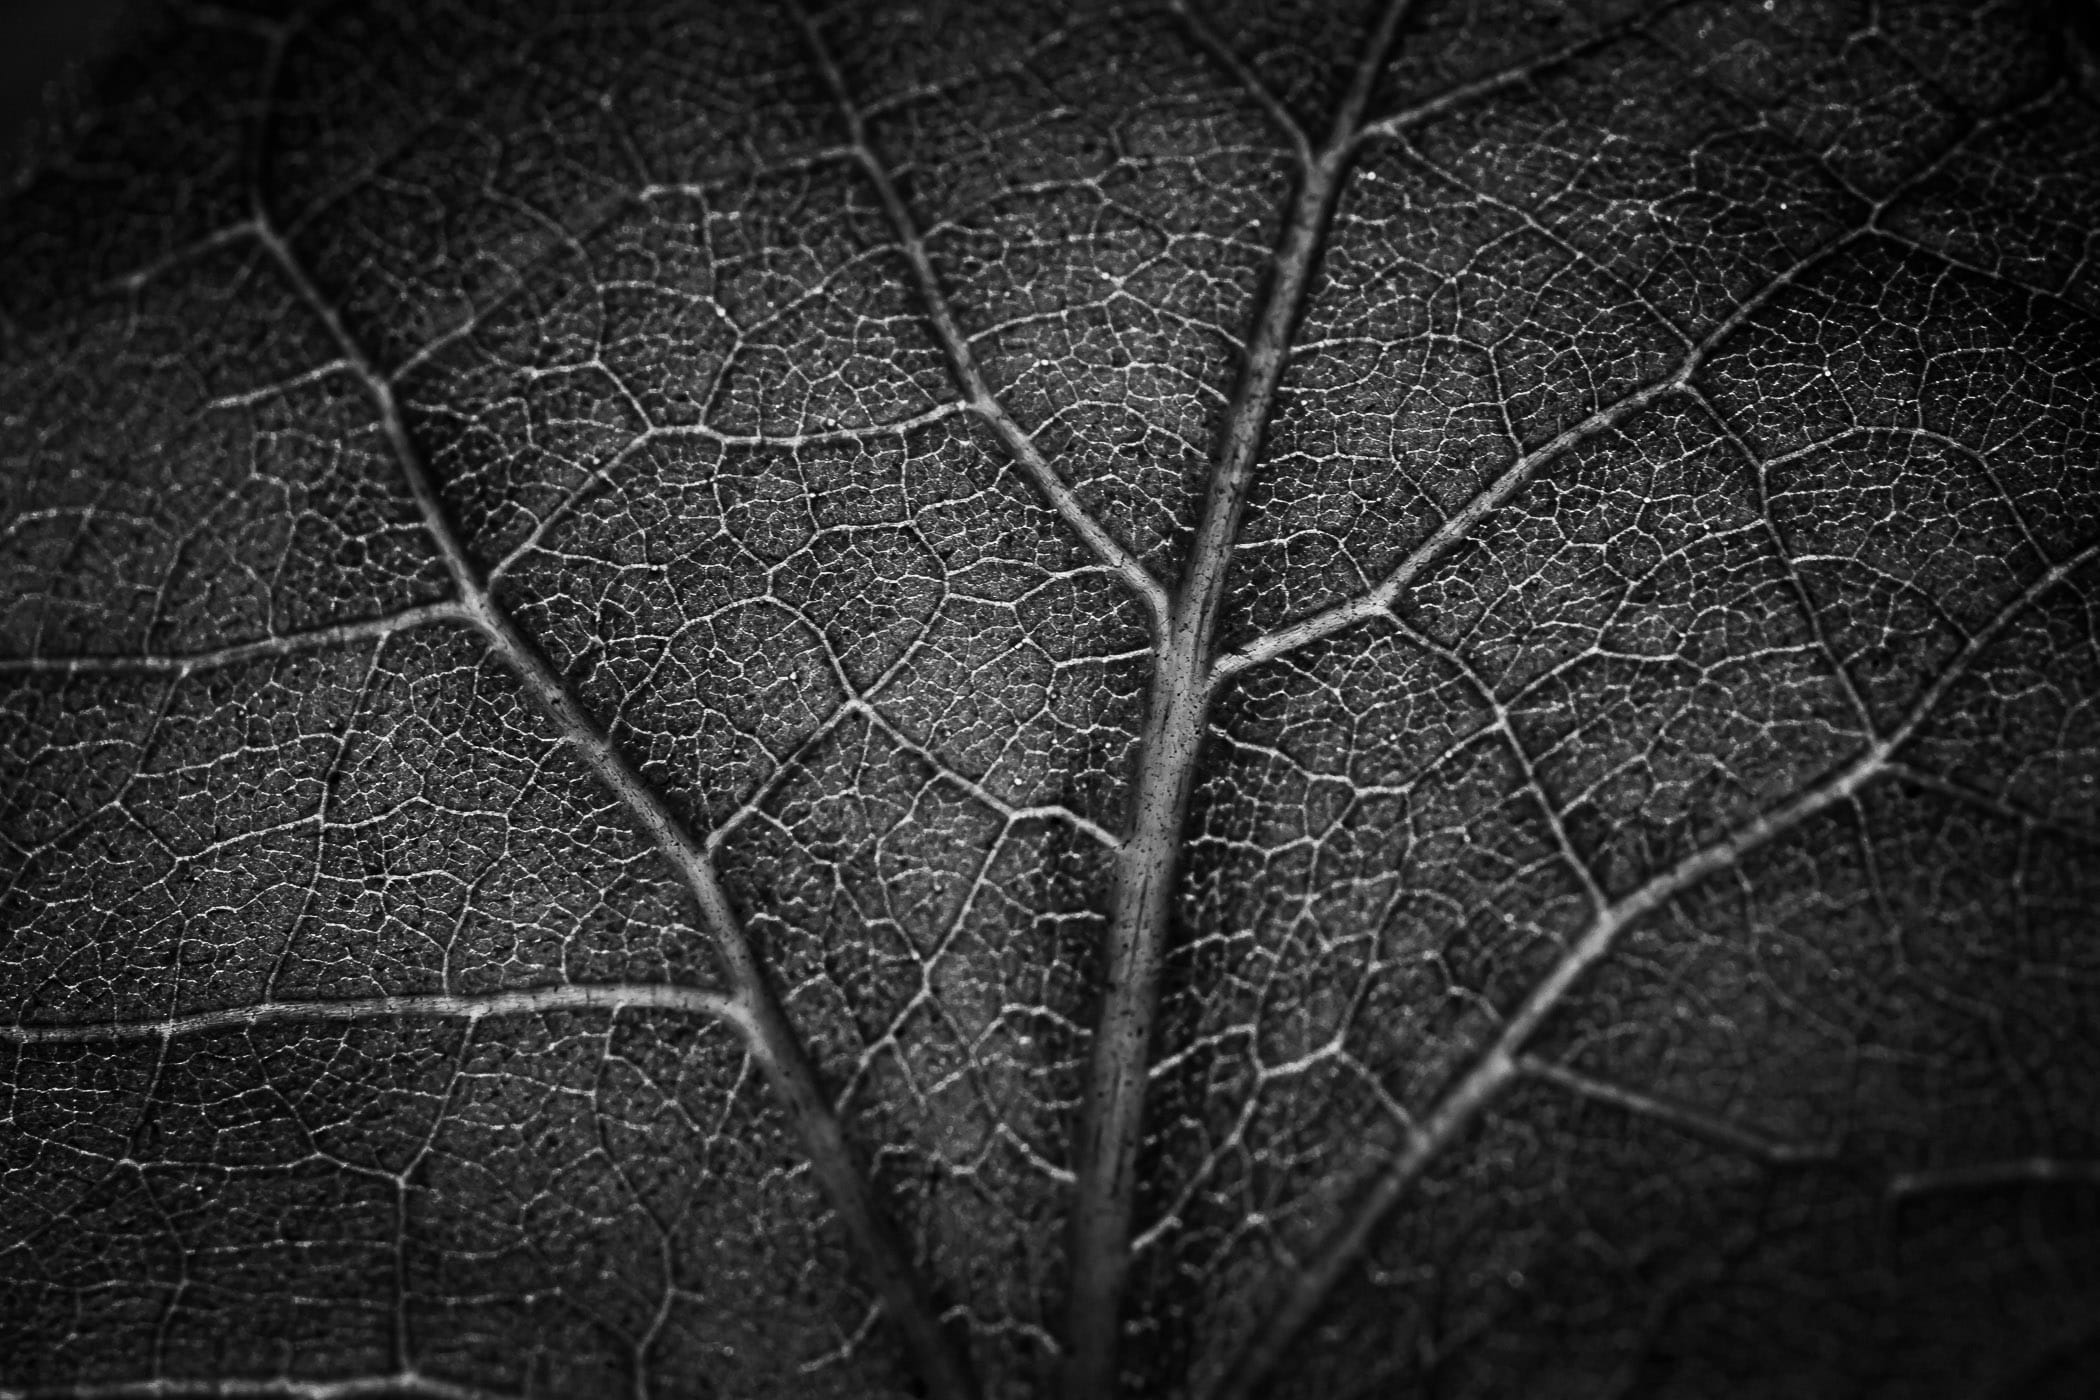 Detail of the back of a leaf, shot at the Dallas Arboretum.